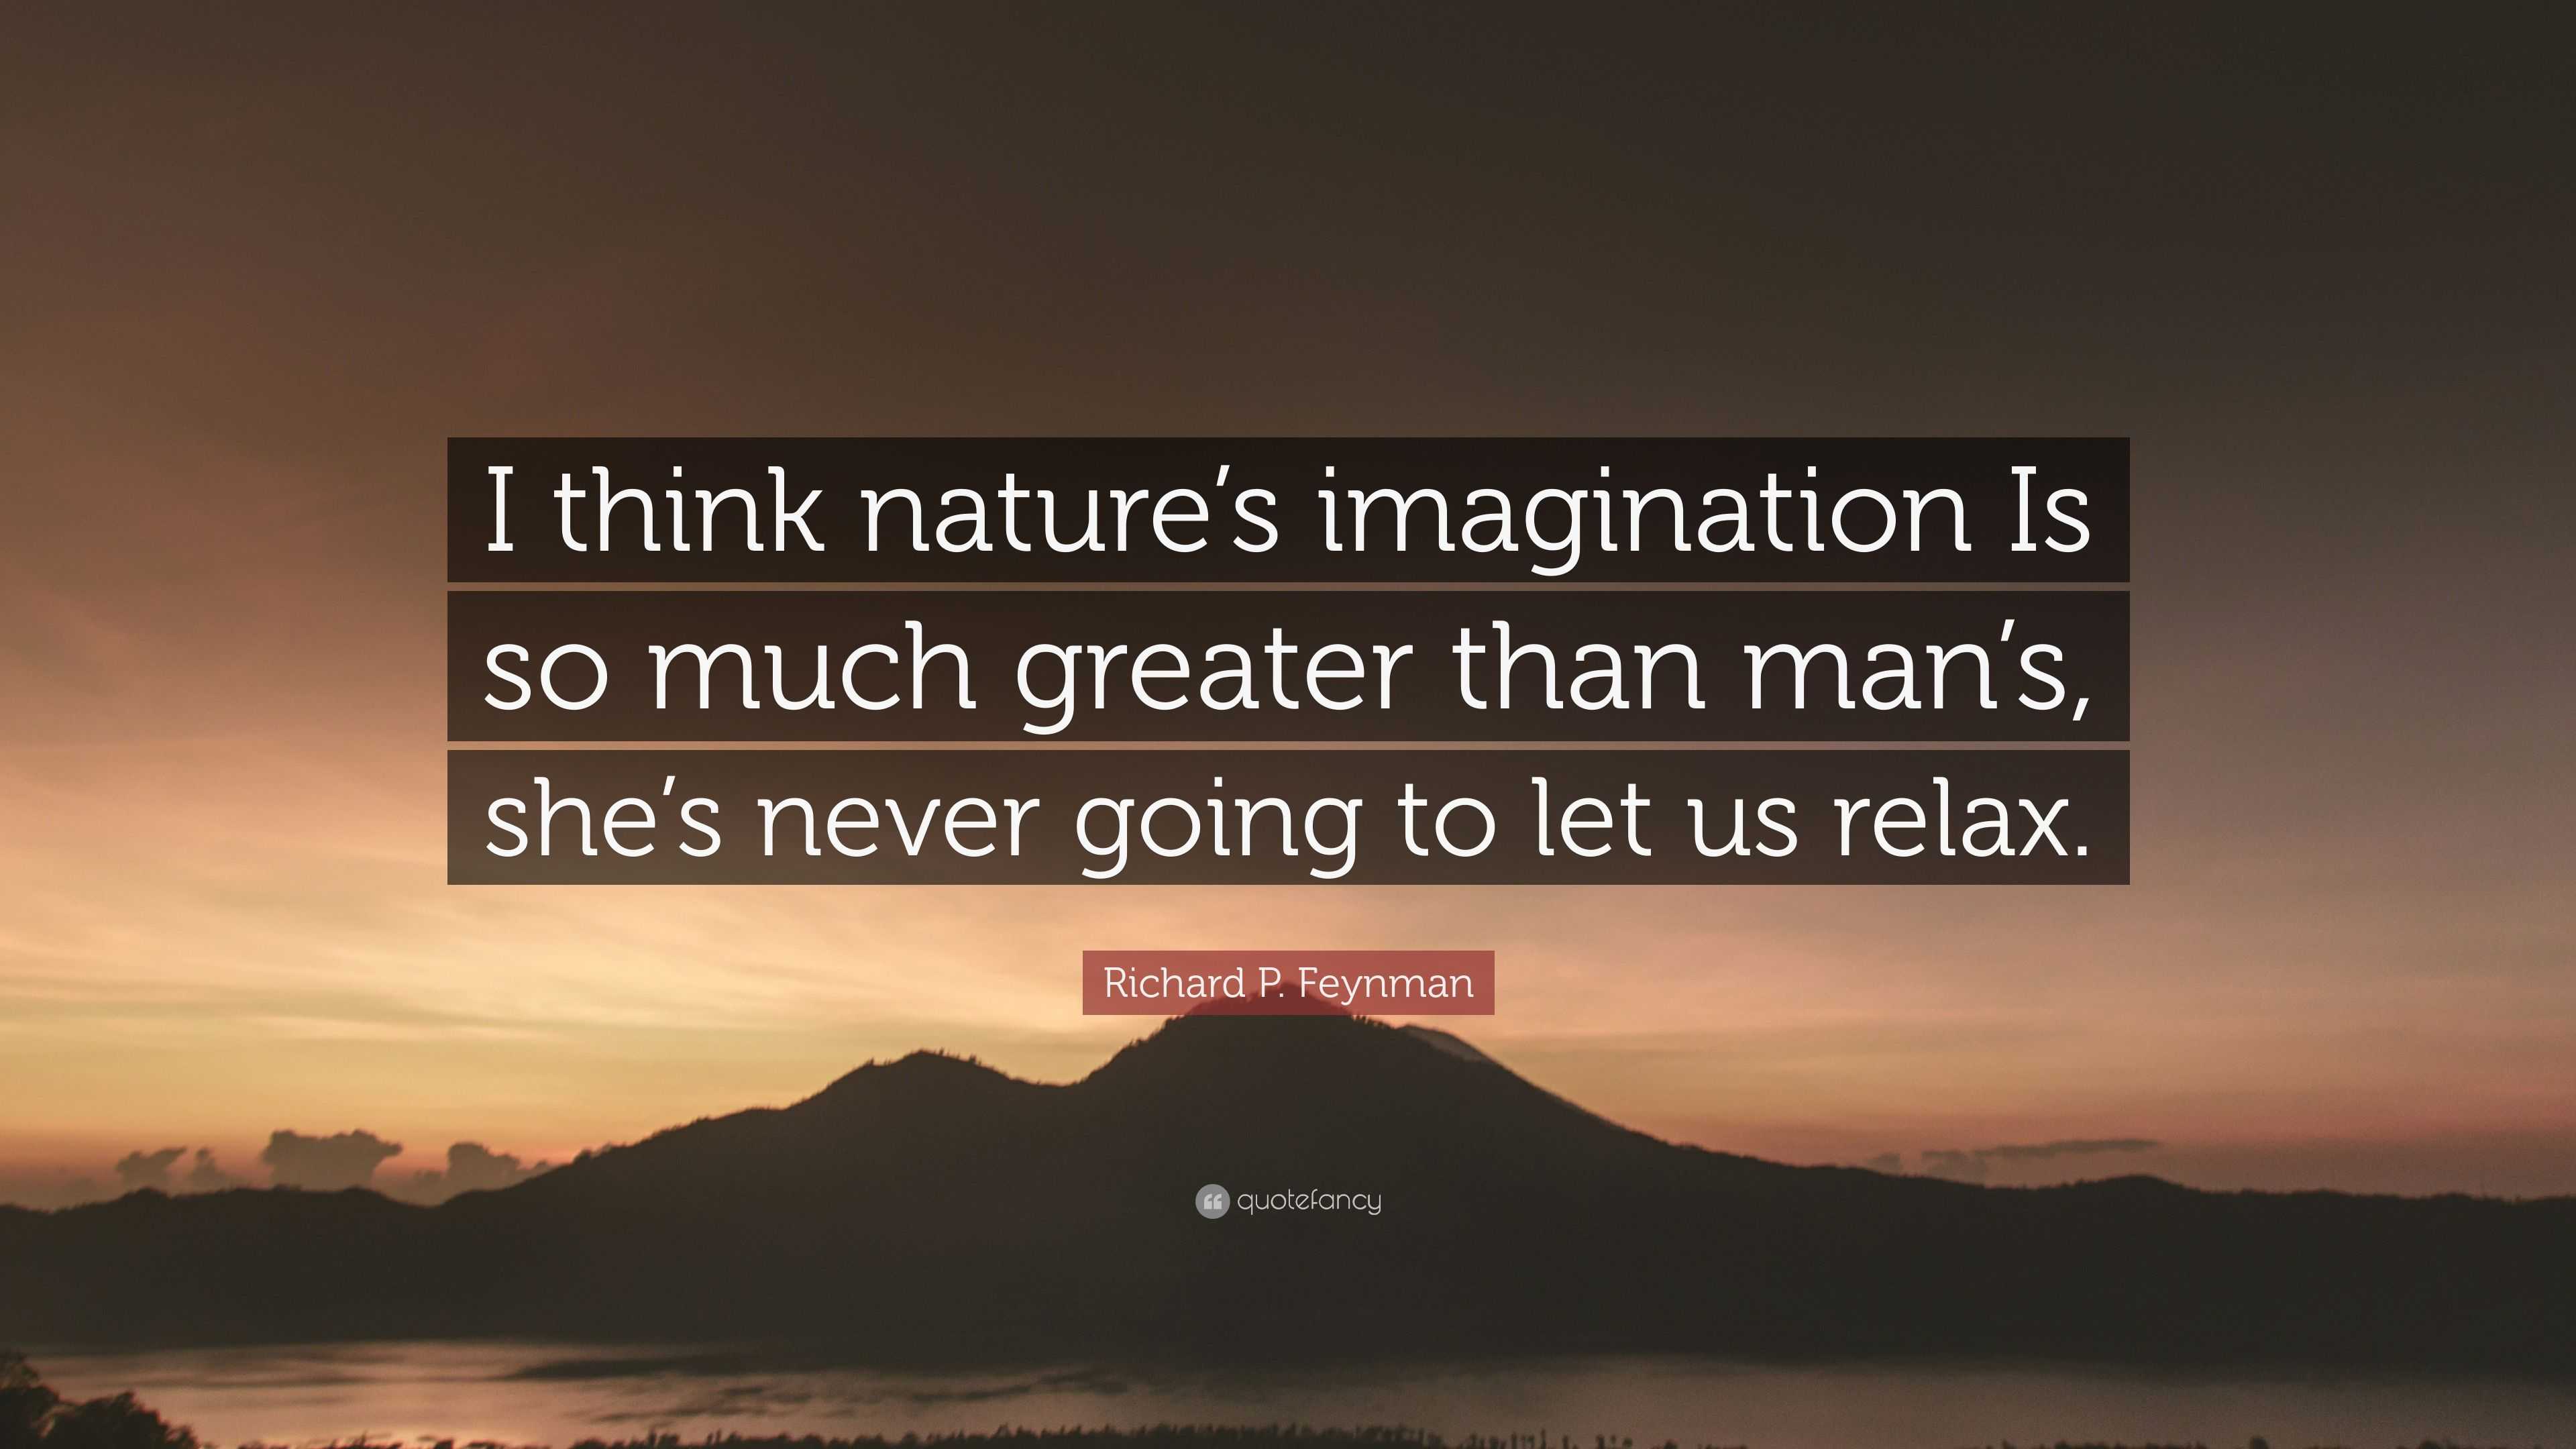 Richard P Feynman Quote I Think Nature S Imagination Is So Much Greater Than Man S She S Never